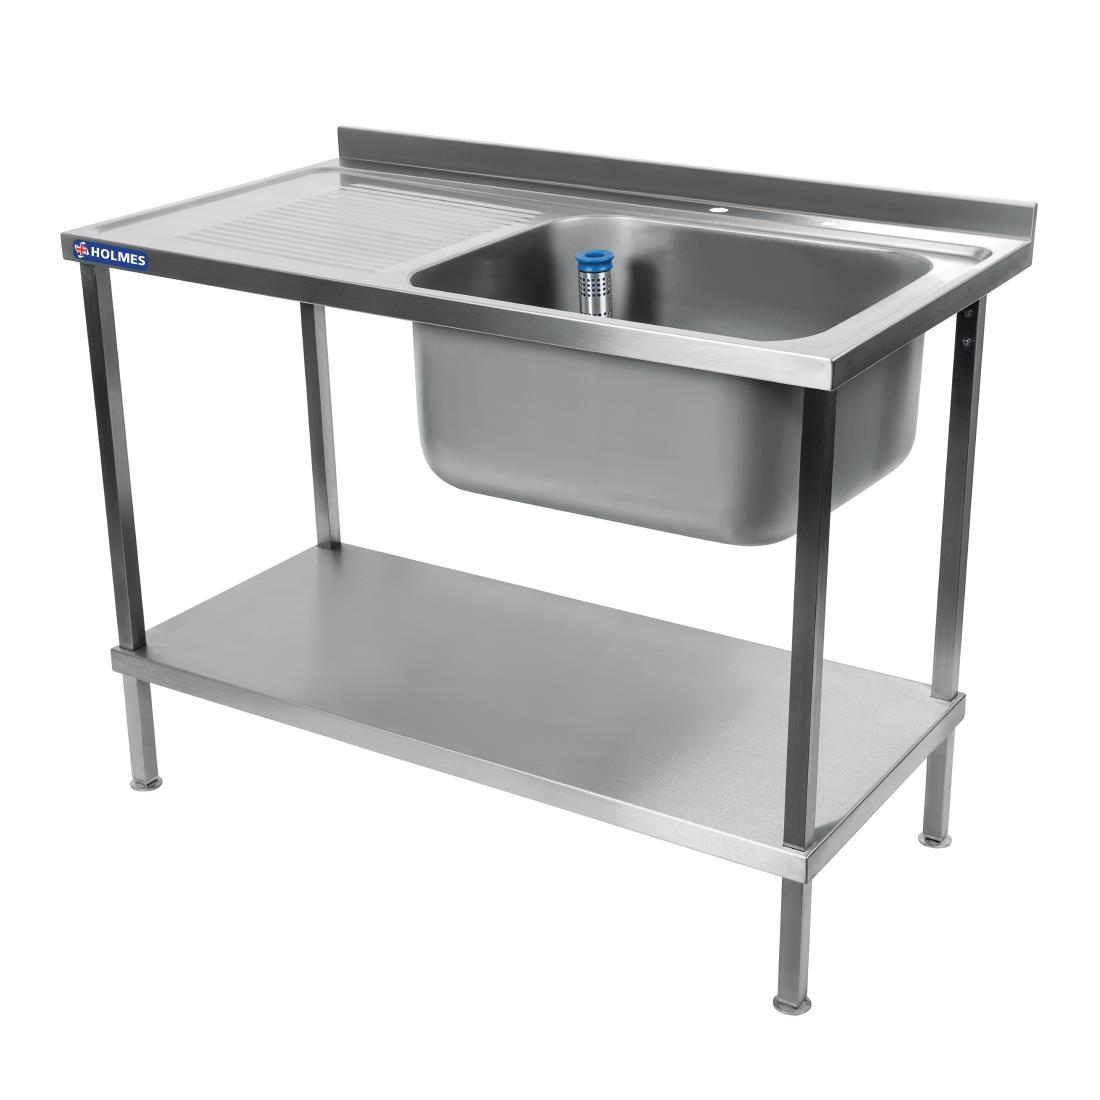 Holmes Fully Assembled Stainless Steel Sink Left Hand Drainer 1200mm - DR387  - 3